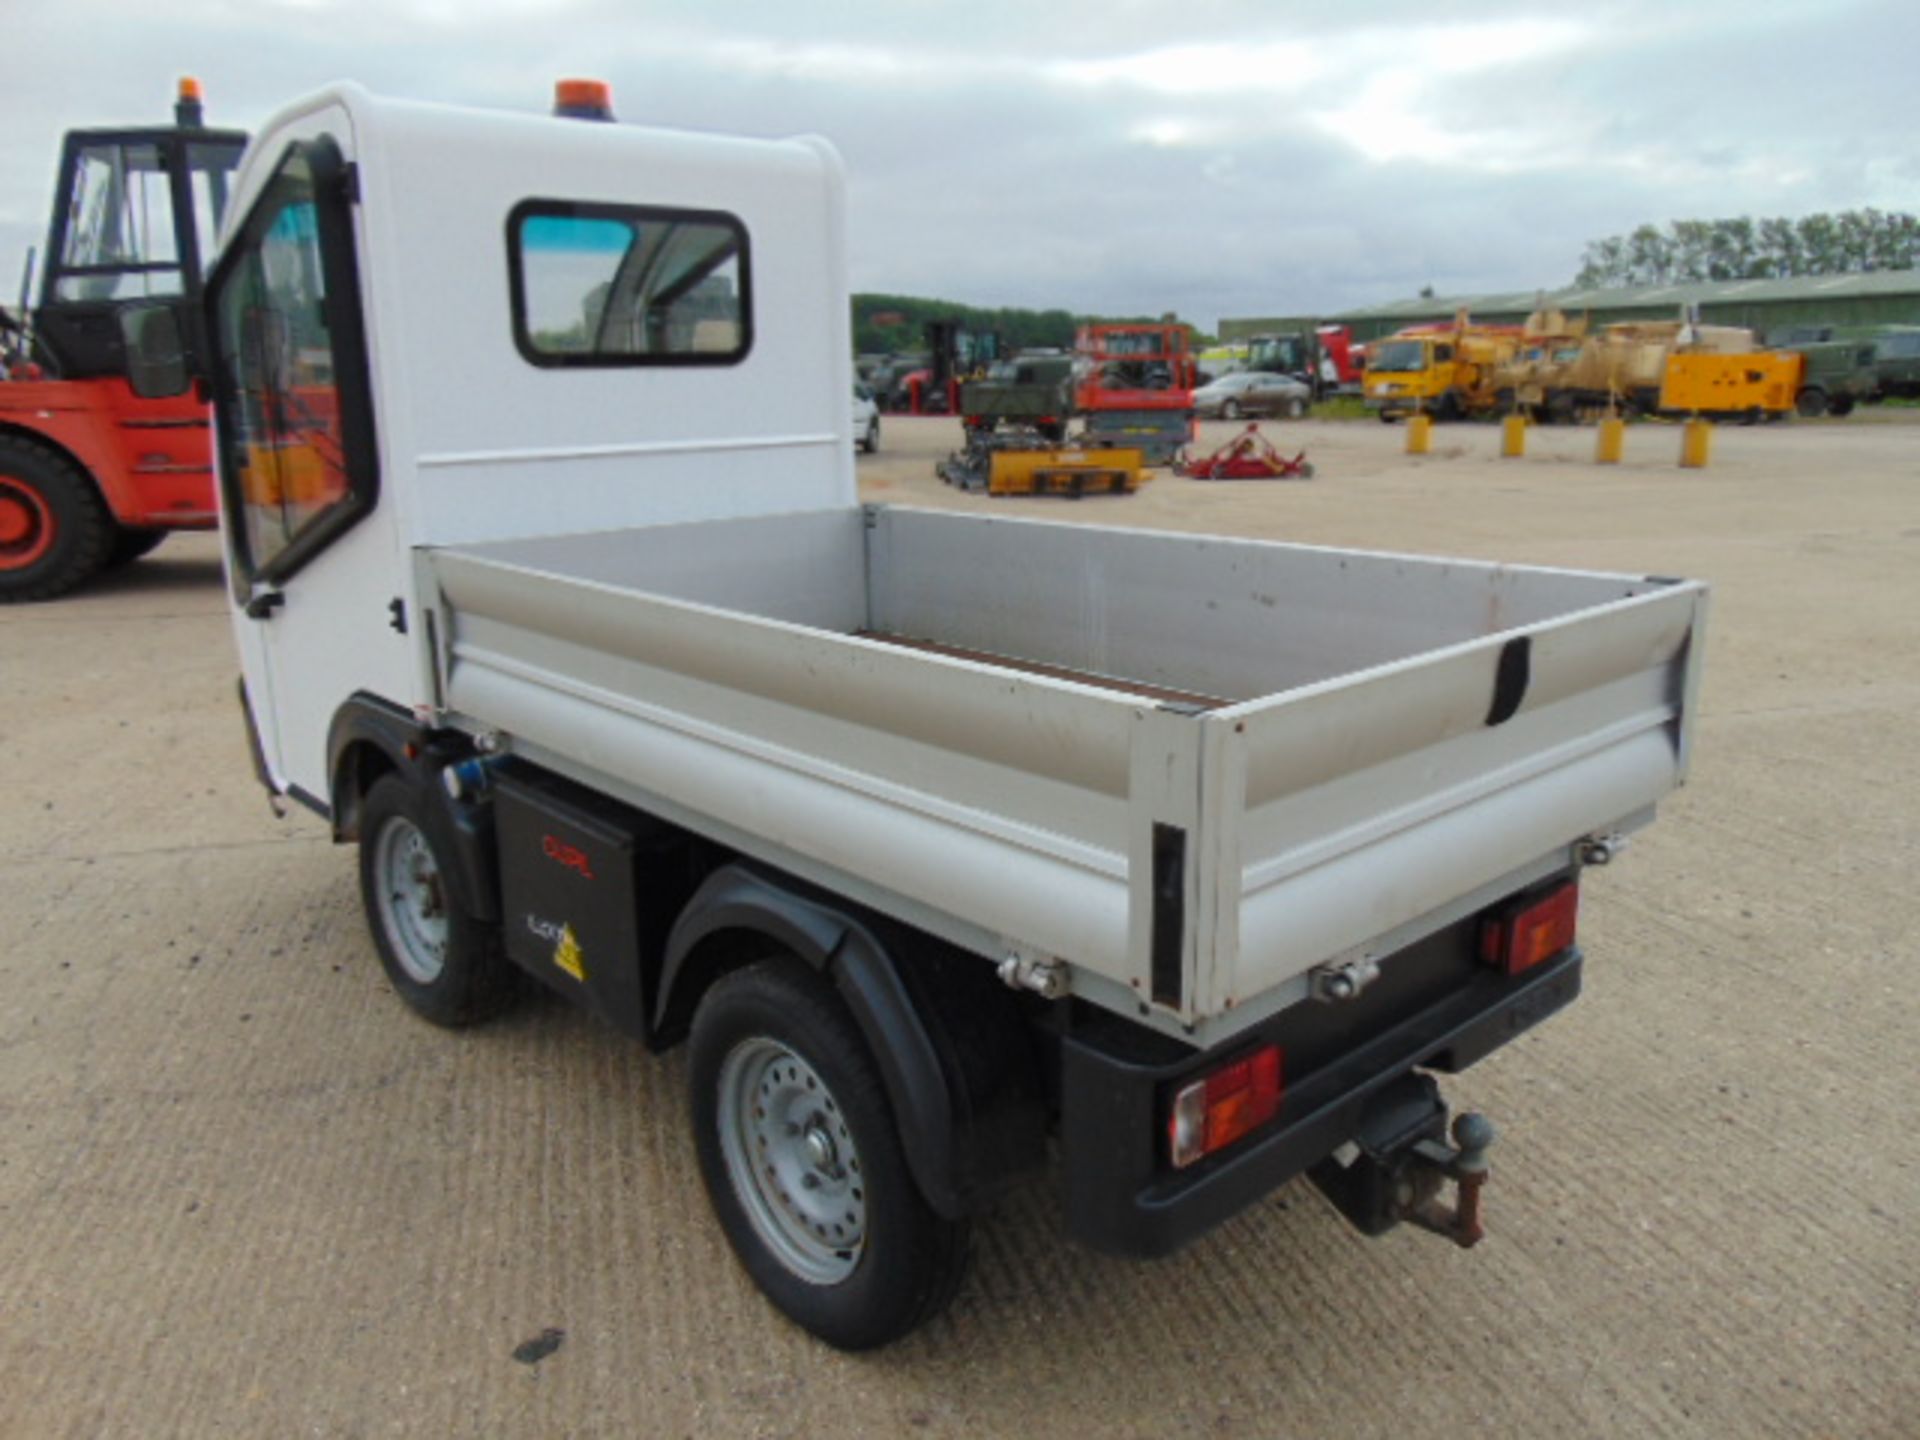 Goupil 2WD Electric Dropside Utility Vehicle - Image 8 of 14